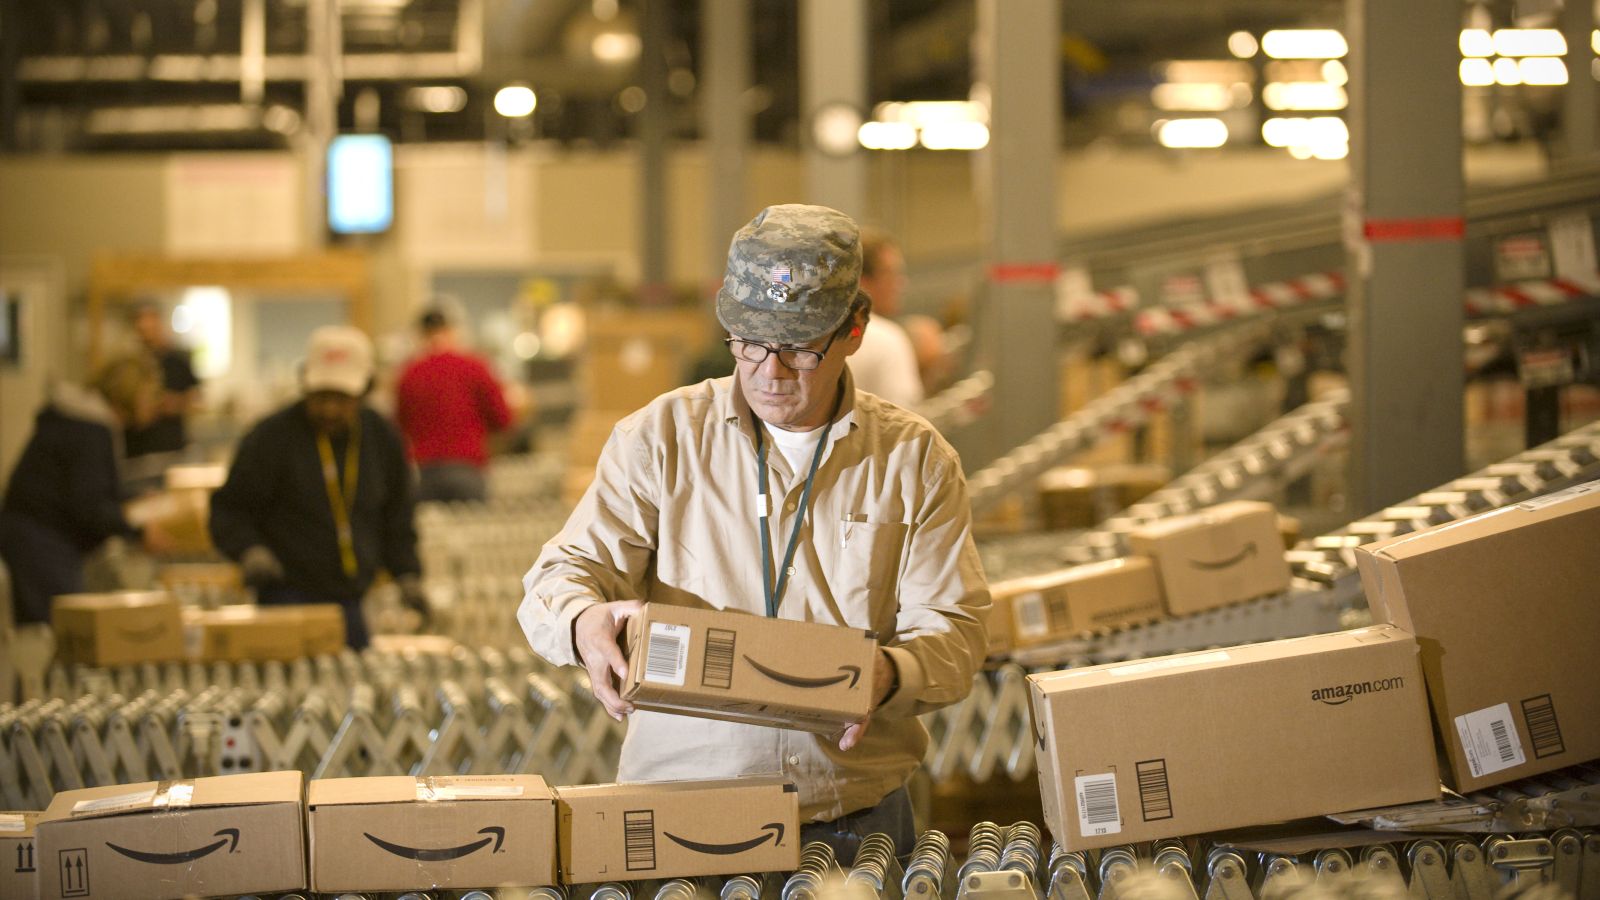 Amazon operates more in-house brands than you think